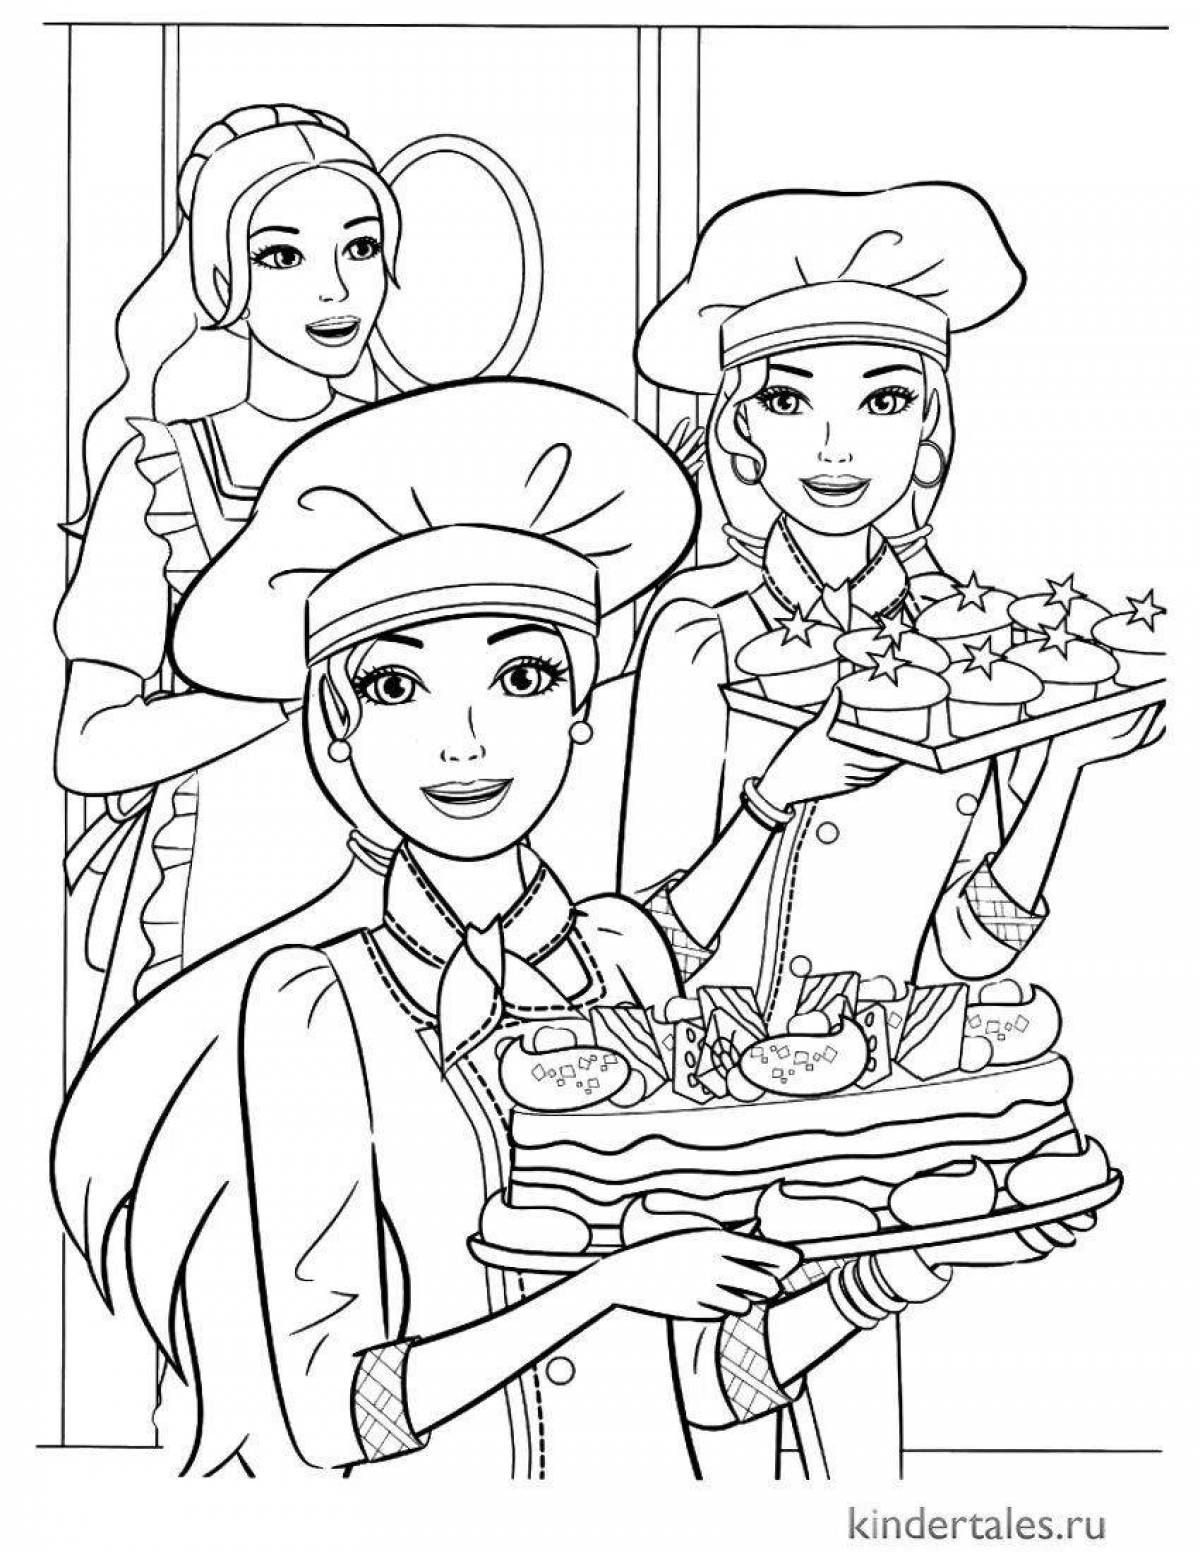 Pastry Chef coloring page